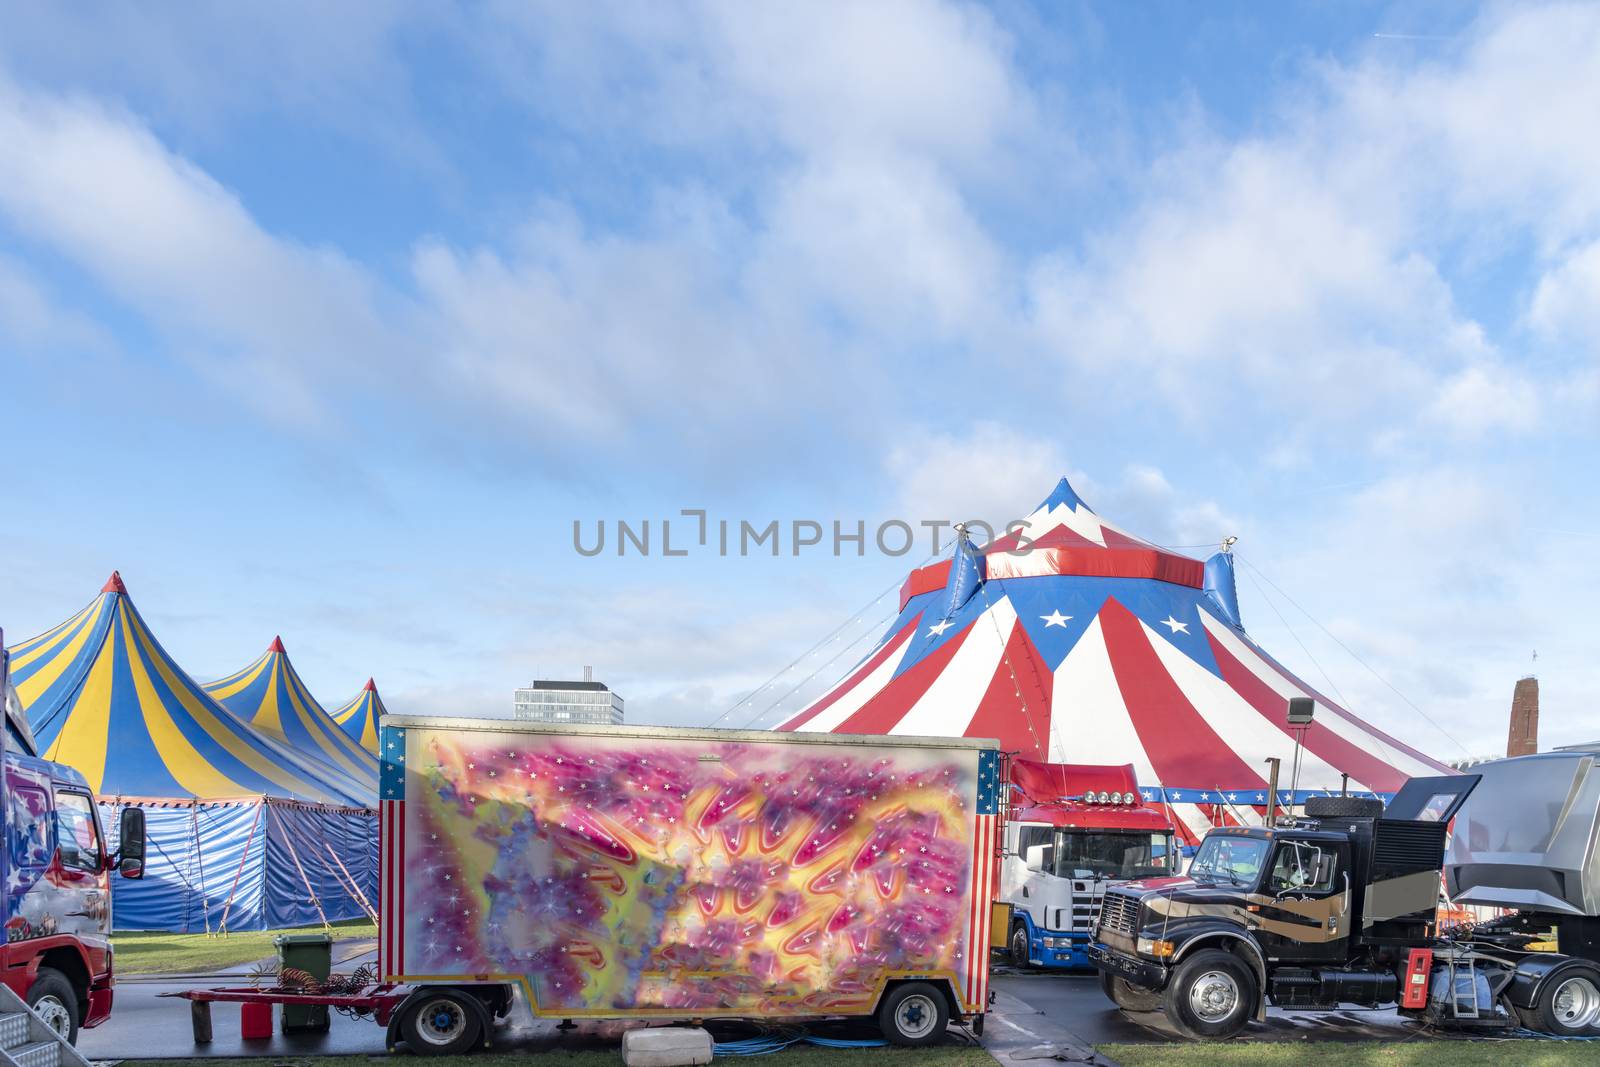 Circus caravanes in front the red and white circus tents topped with bleu starred cover against a sunny blue sky with clouds by ankorlight